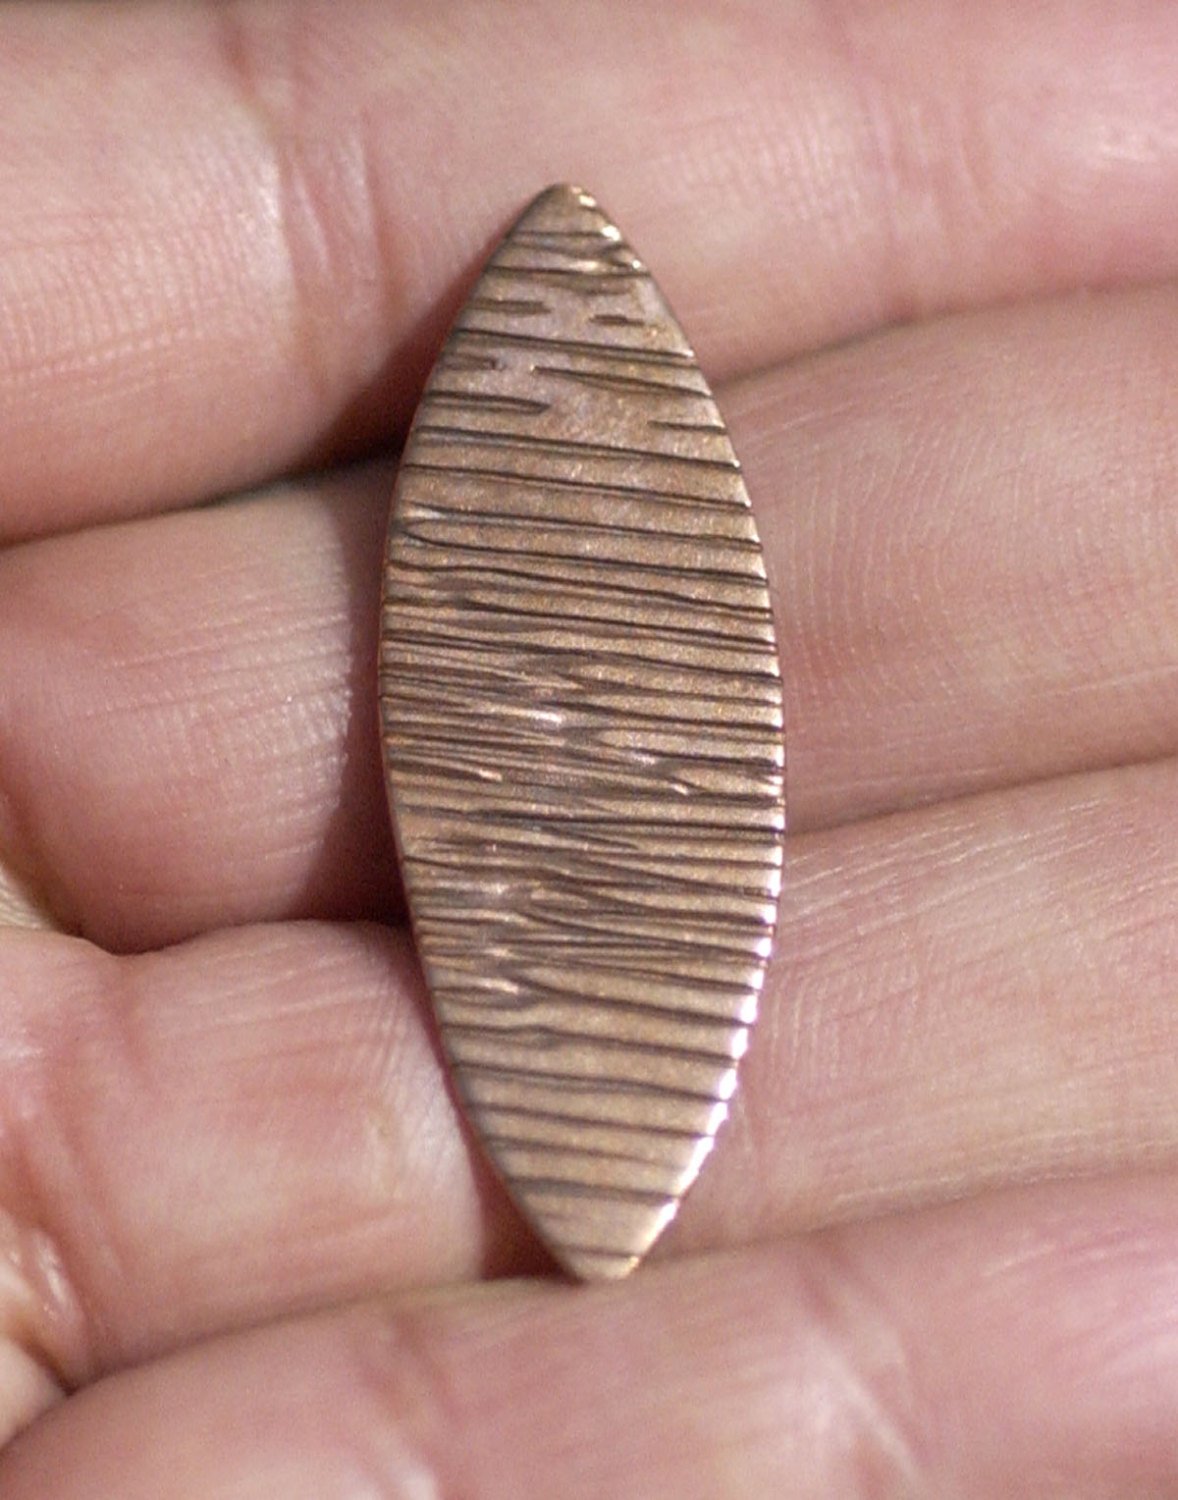 Woodgrain Eye Pointed Oval Blank 38mm x 13mm  Shape Cutout for Enameling Stamping Texturing Variety of Metals